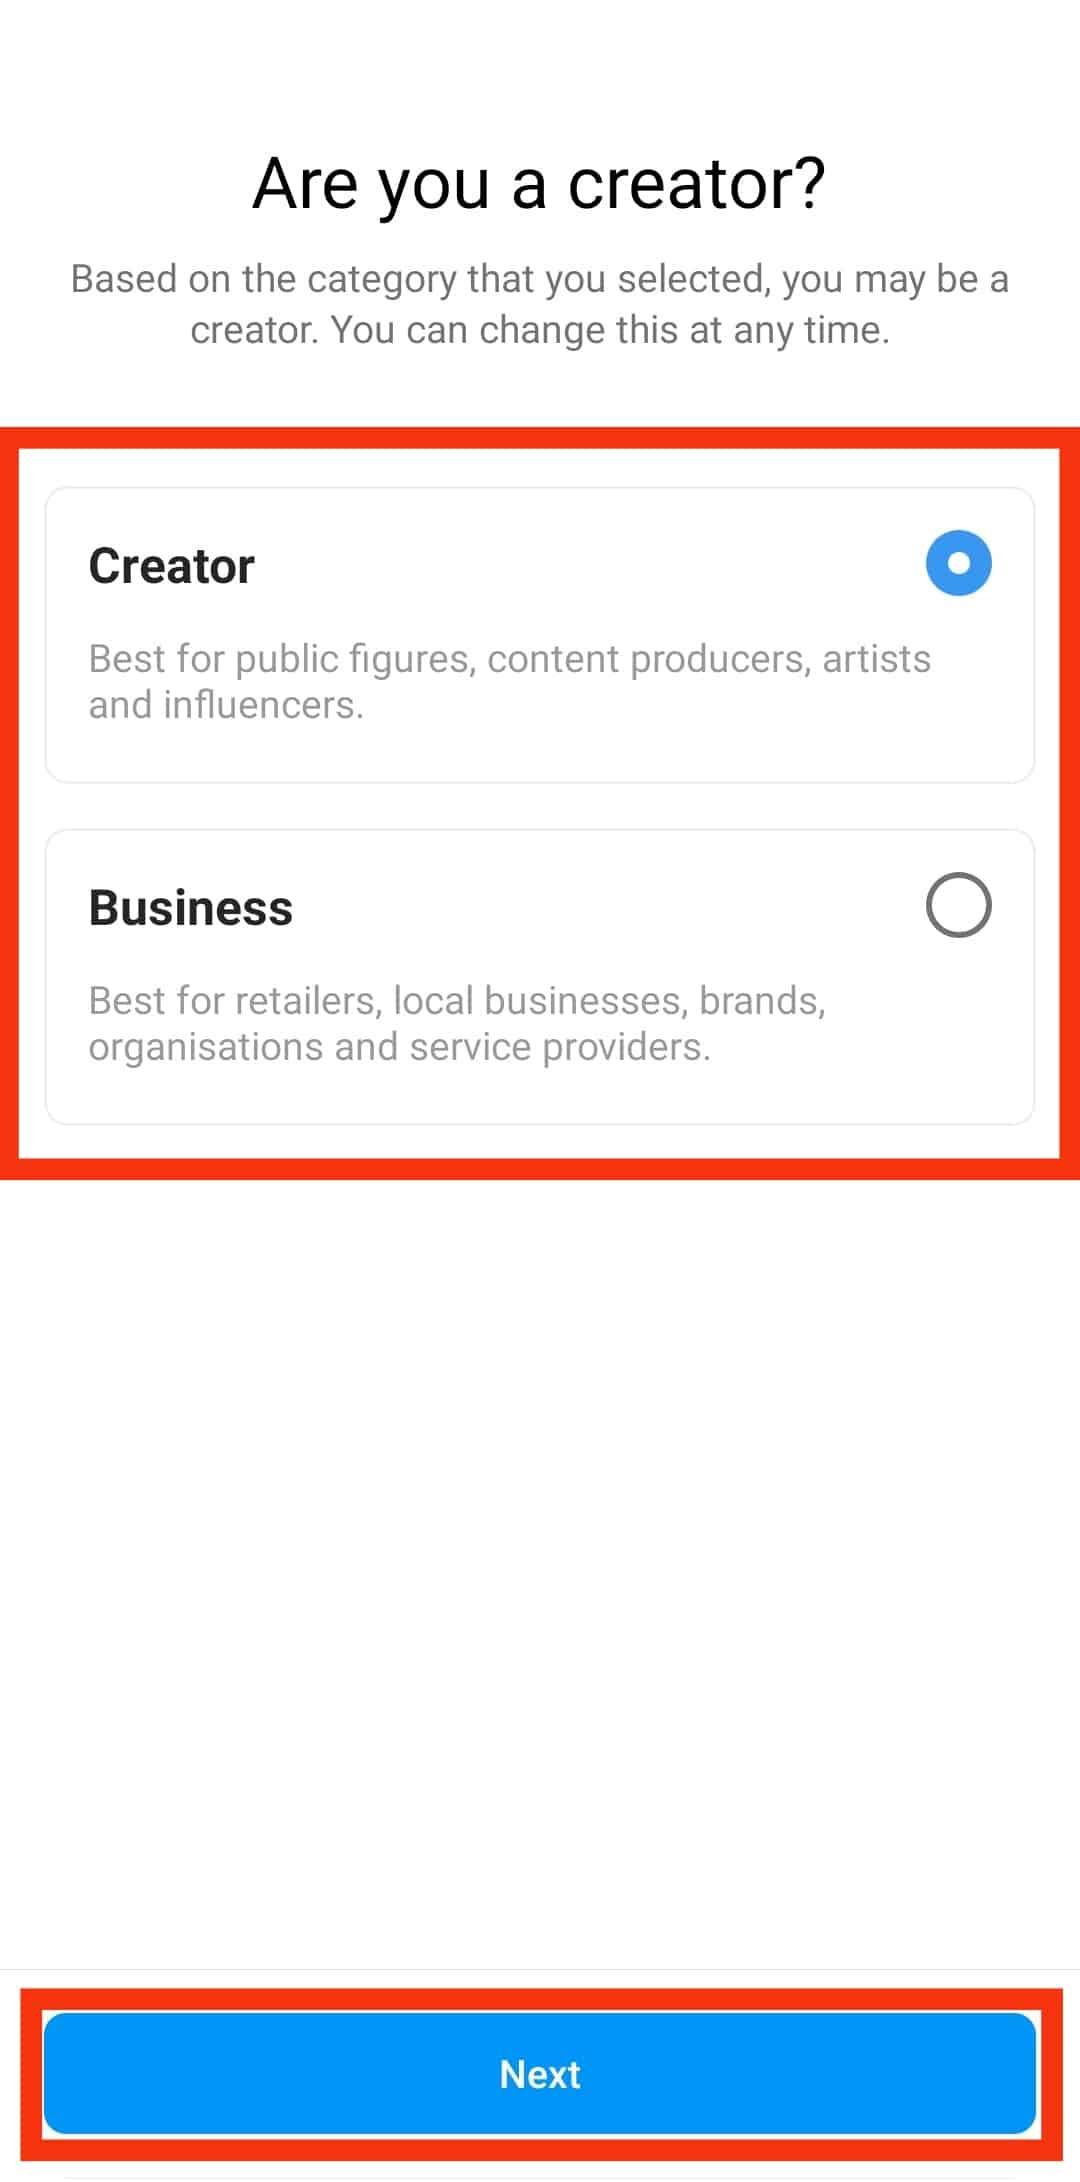 Choose Between Creator Or Business And Tap Next